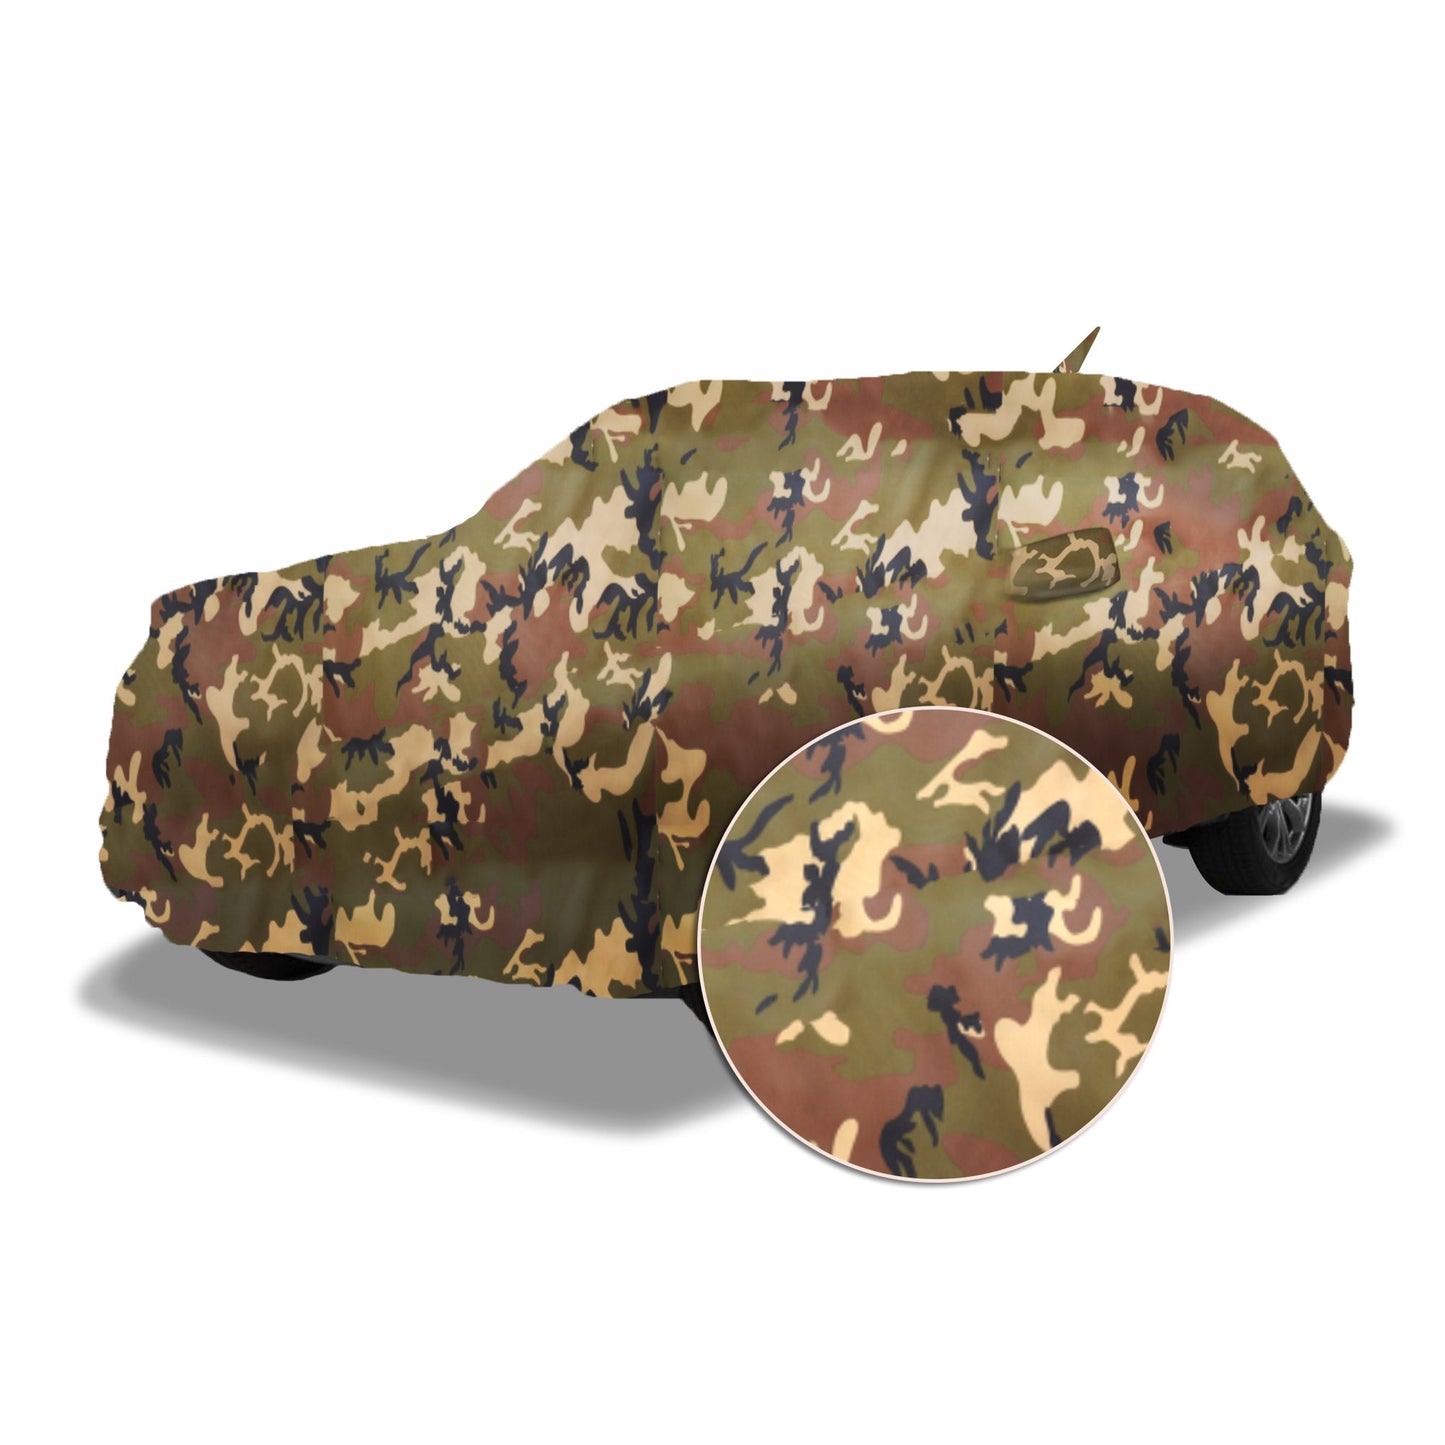 Ascot Maruti Suzuki Alto Car Body Cover 2000-2014 Model Extra Strong & Dust Proof Jungle Military Car Cover with UV Proof & Water-Resistant Coating